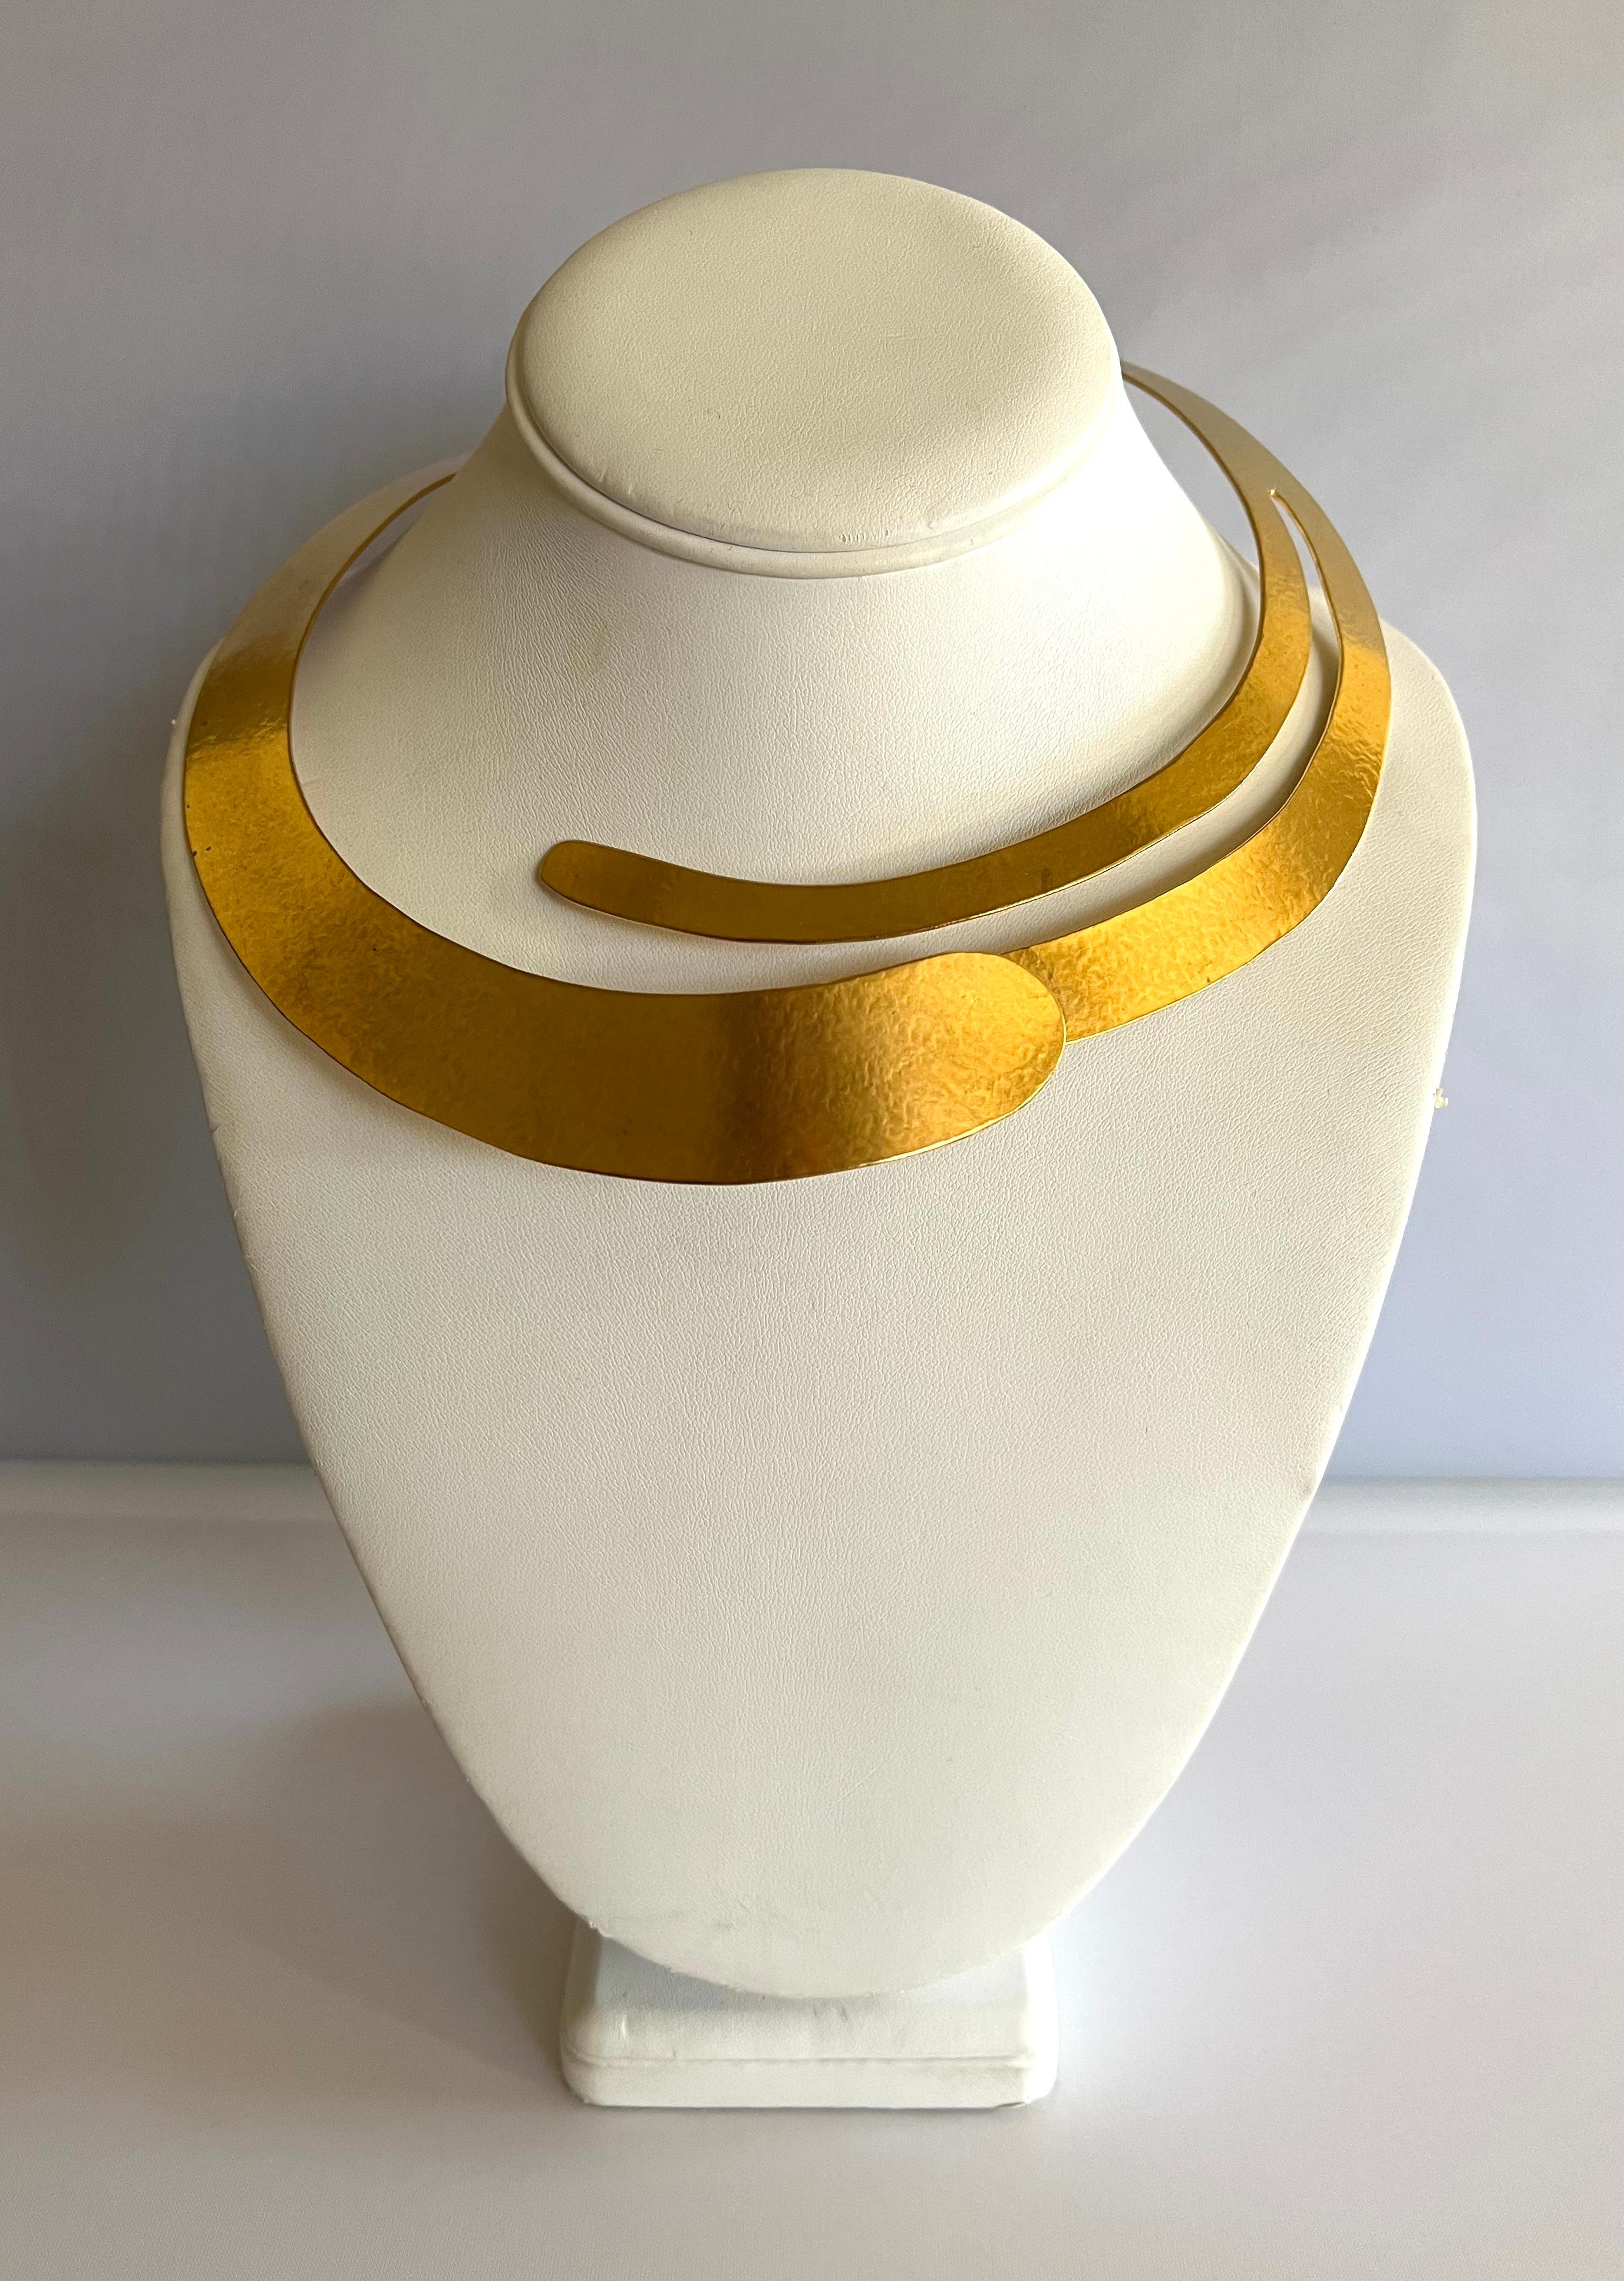 Hand-crafted contemporary hammered gilt metal asymmetrical statement necklace by Herve Van Der Straeten - made in Paris circa 2000s. Singed HVD.
The necklace opens up to accommodate any size neck and has an extender chain.